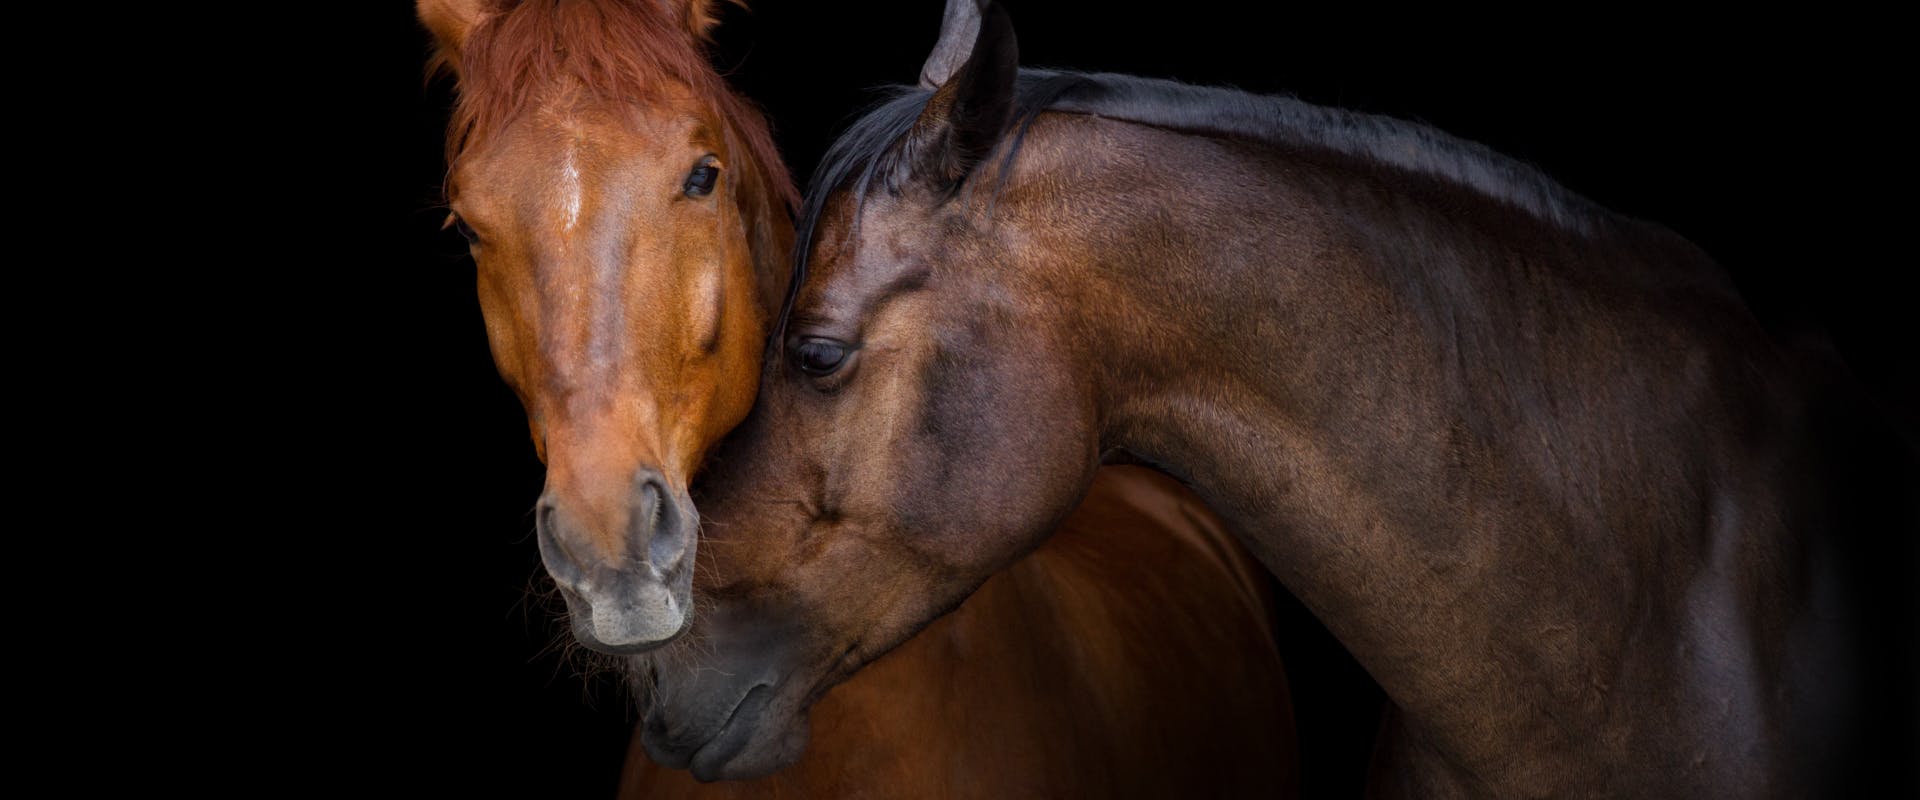 two horses affectionately touching faces in a dark stable